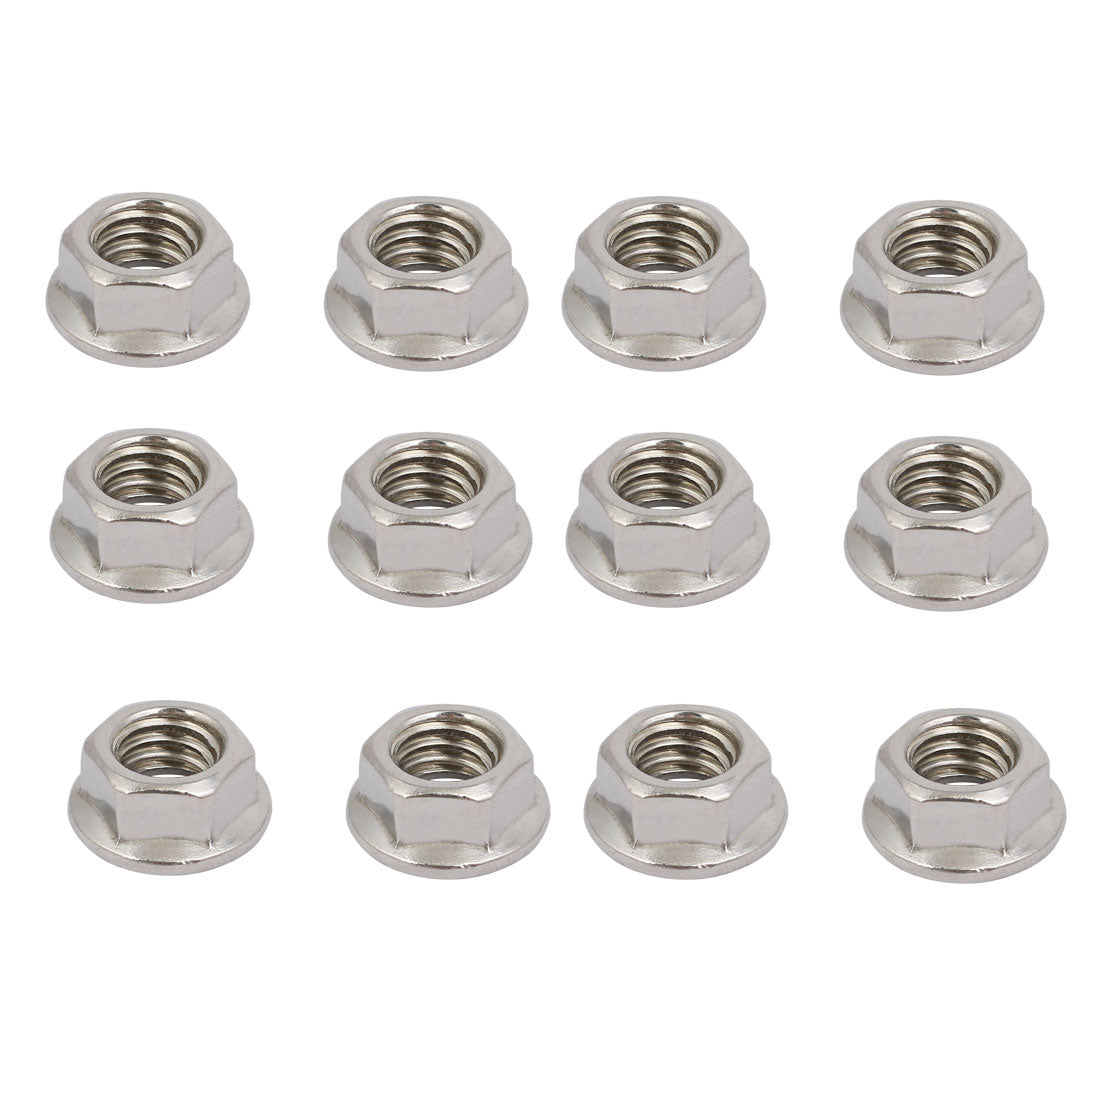 uxcell Uxcell 12pcs 3/8"-16 UNC Thread 304 Stainless Steel Hex Serrated Flange Nut Fastener